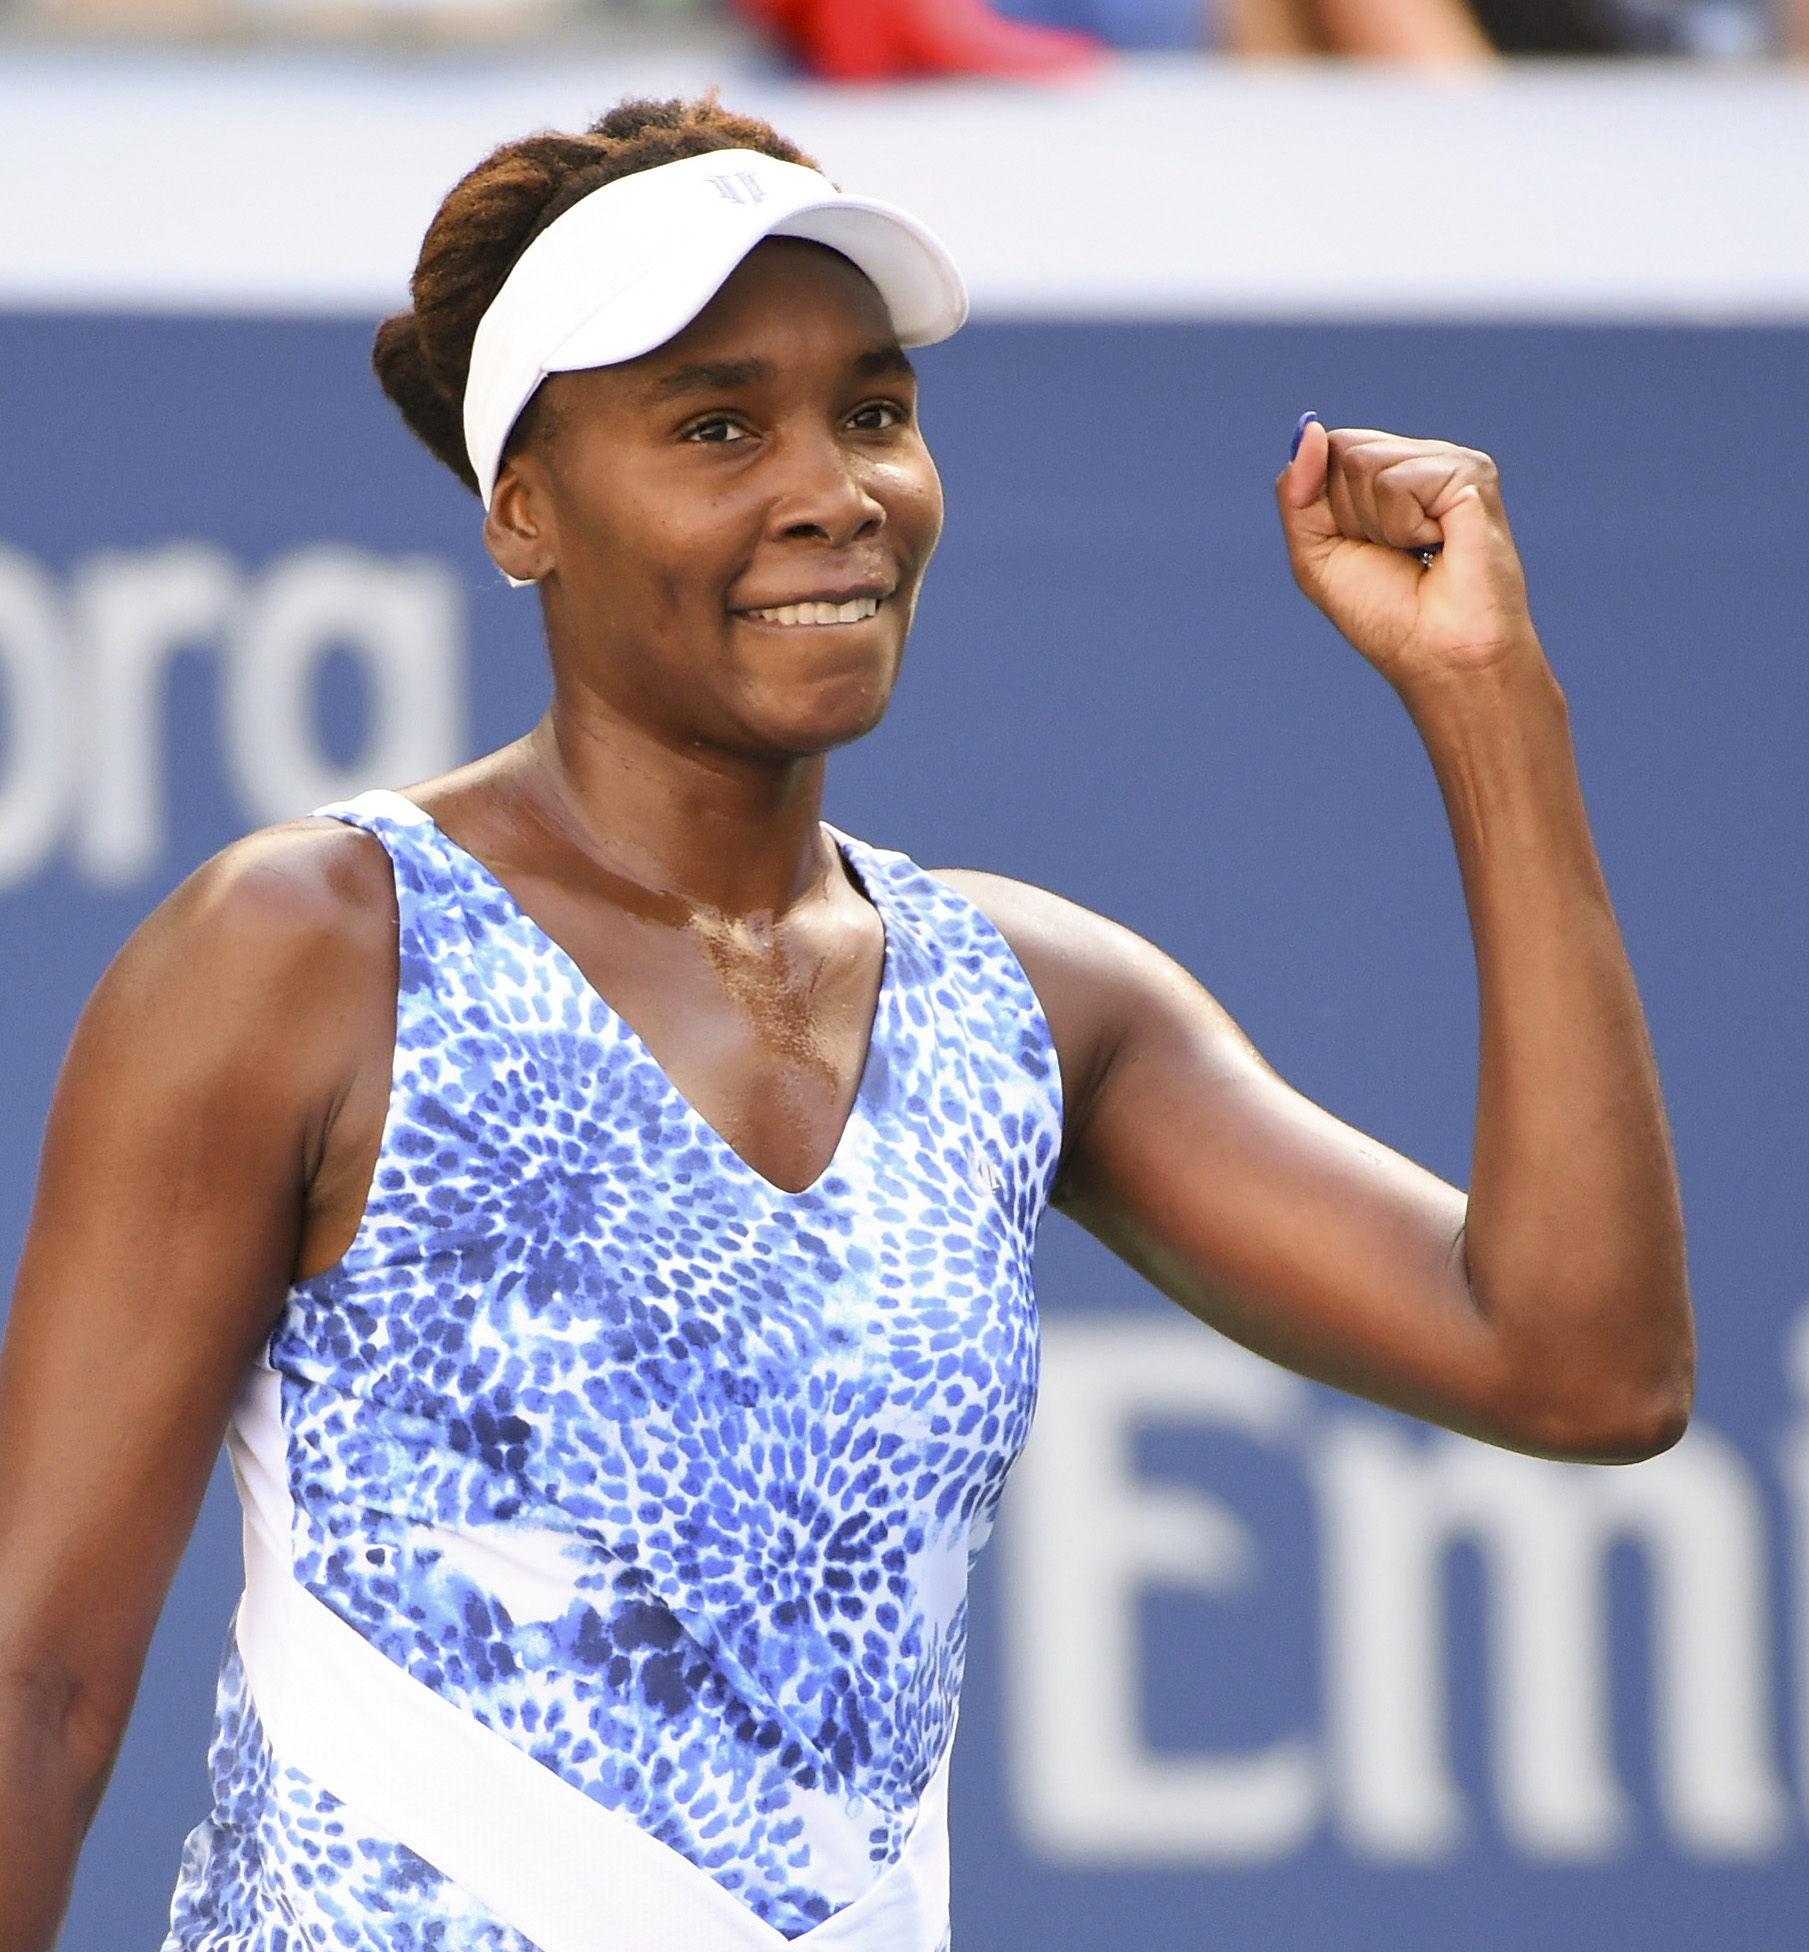 Sep 6, 2015; New York, NY, USA; Venus Williams of USA after beating Anett Kontaveit of Estonia on day seven of the 2015 U.S. Open tennis tournament at USTA Billie Jean King National Tennis Center. Mandatory Credit: Robert Deutsch-USA TODAY Sports